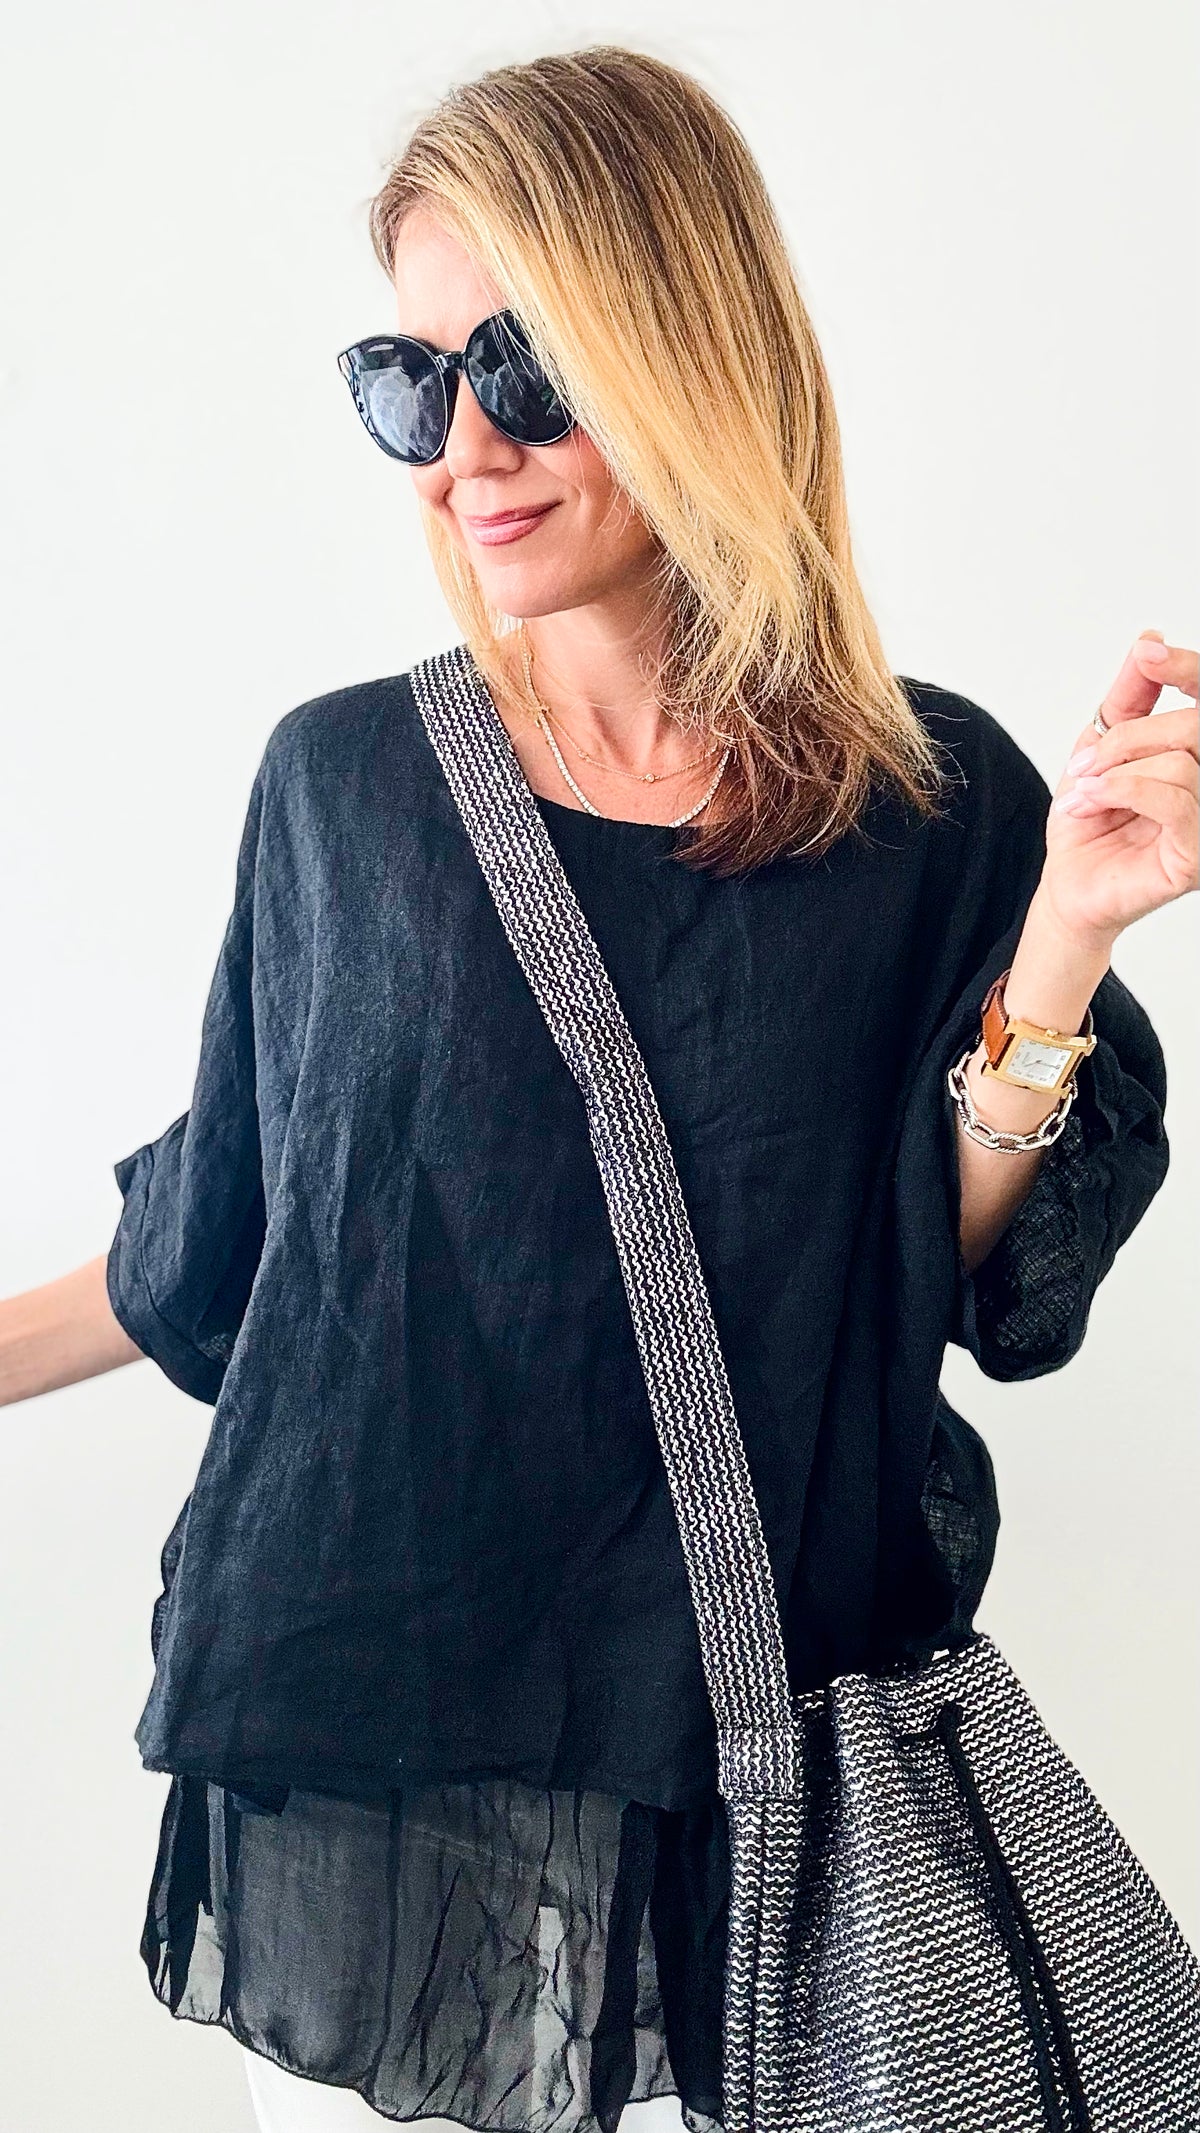 Linen Ruffle Italian Top - Black-110 Short Sleeve Tops-Italianissimo-Coastal Bloom Boutique, find the trendiest versions of the popular styles and looks Located in Indialantic, FL